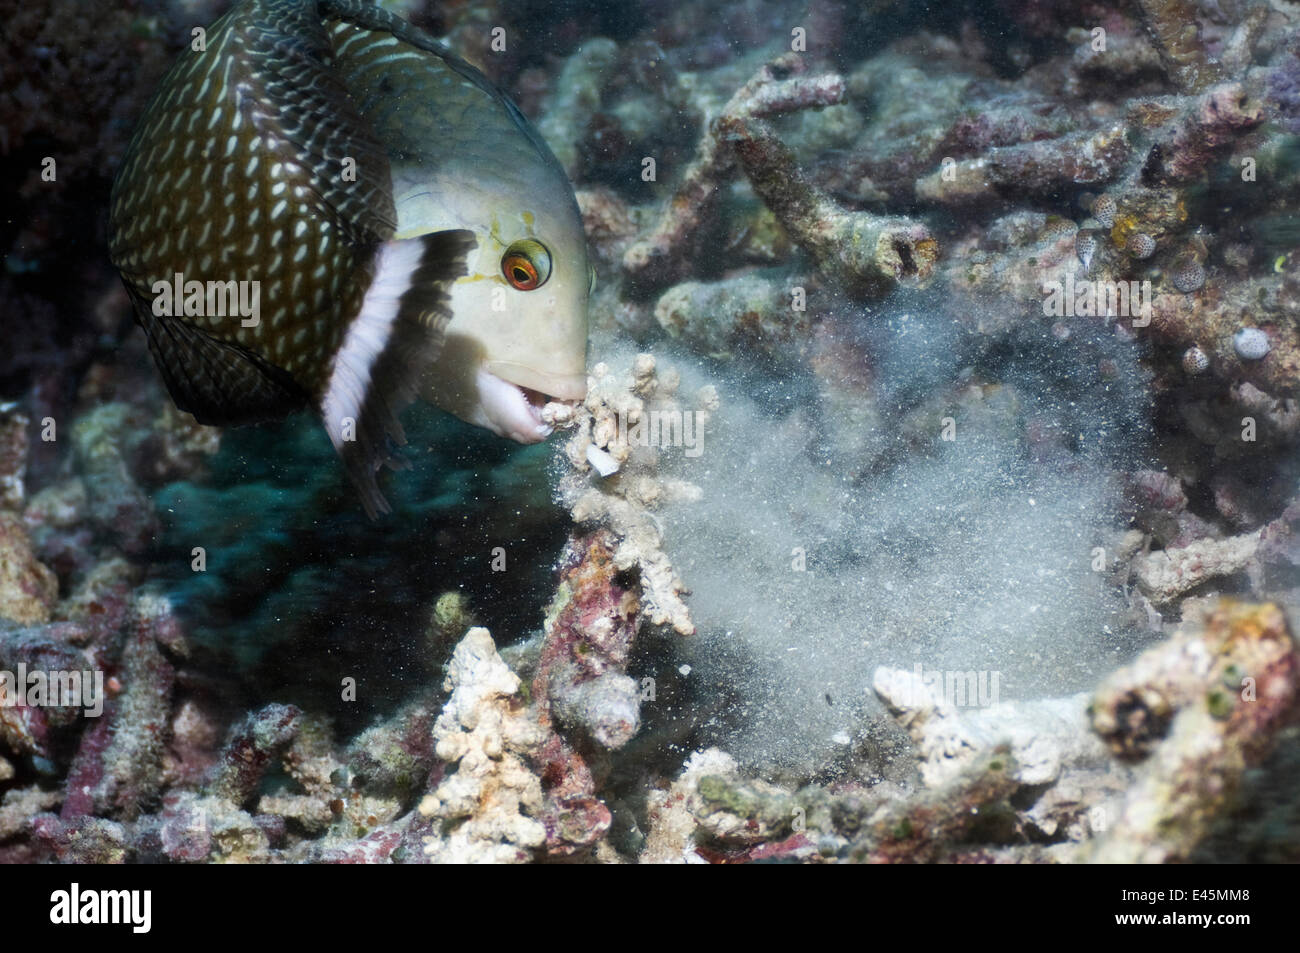 Rockmover / Dragon wrasse (Novaculichthys taeniourus) moving coral rubble to find benthic invertebrates to feed on. Misool, Raja Ampat, West Papua, Indonesia. Stock Photo